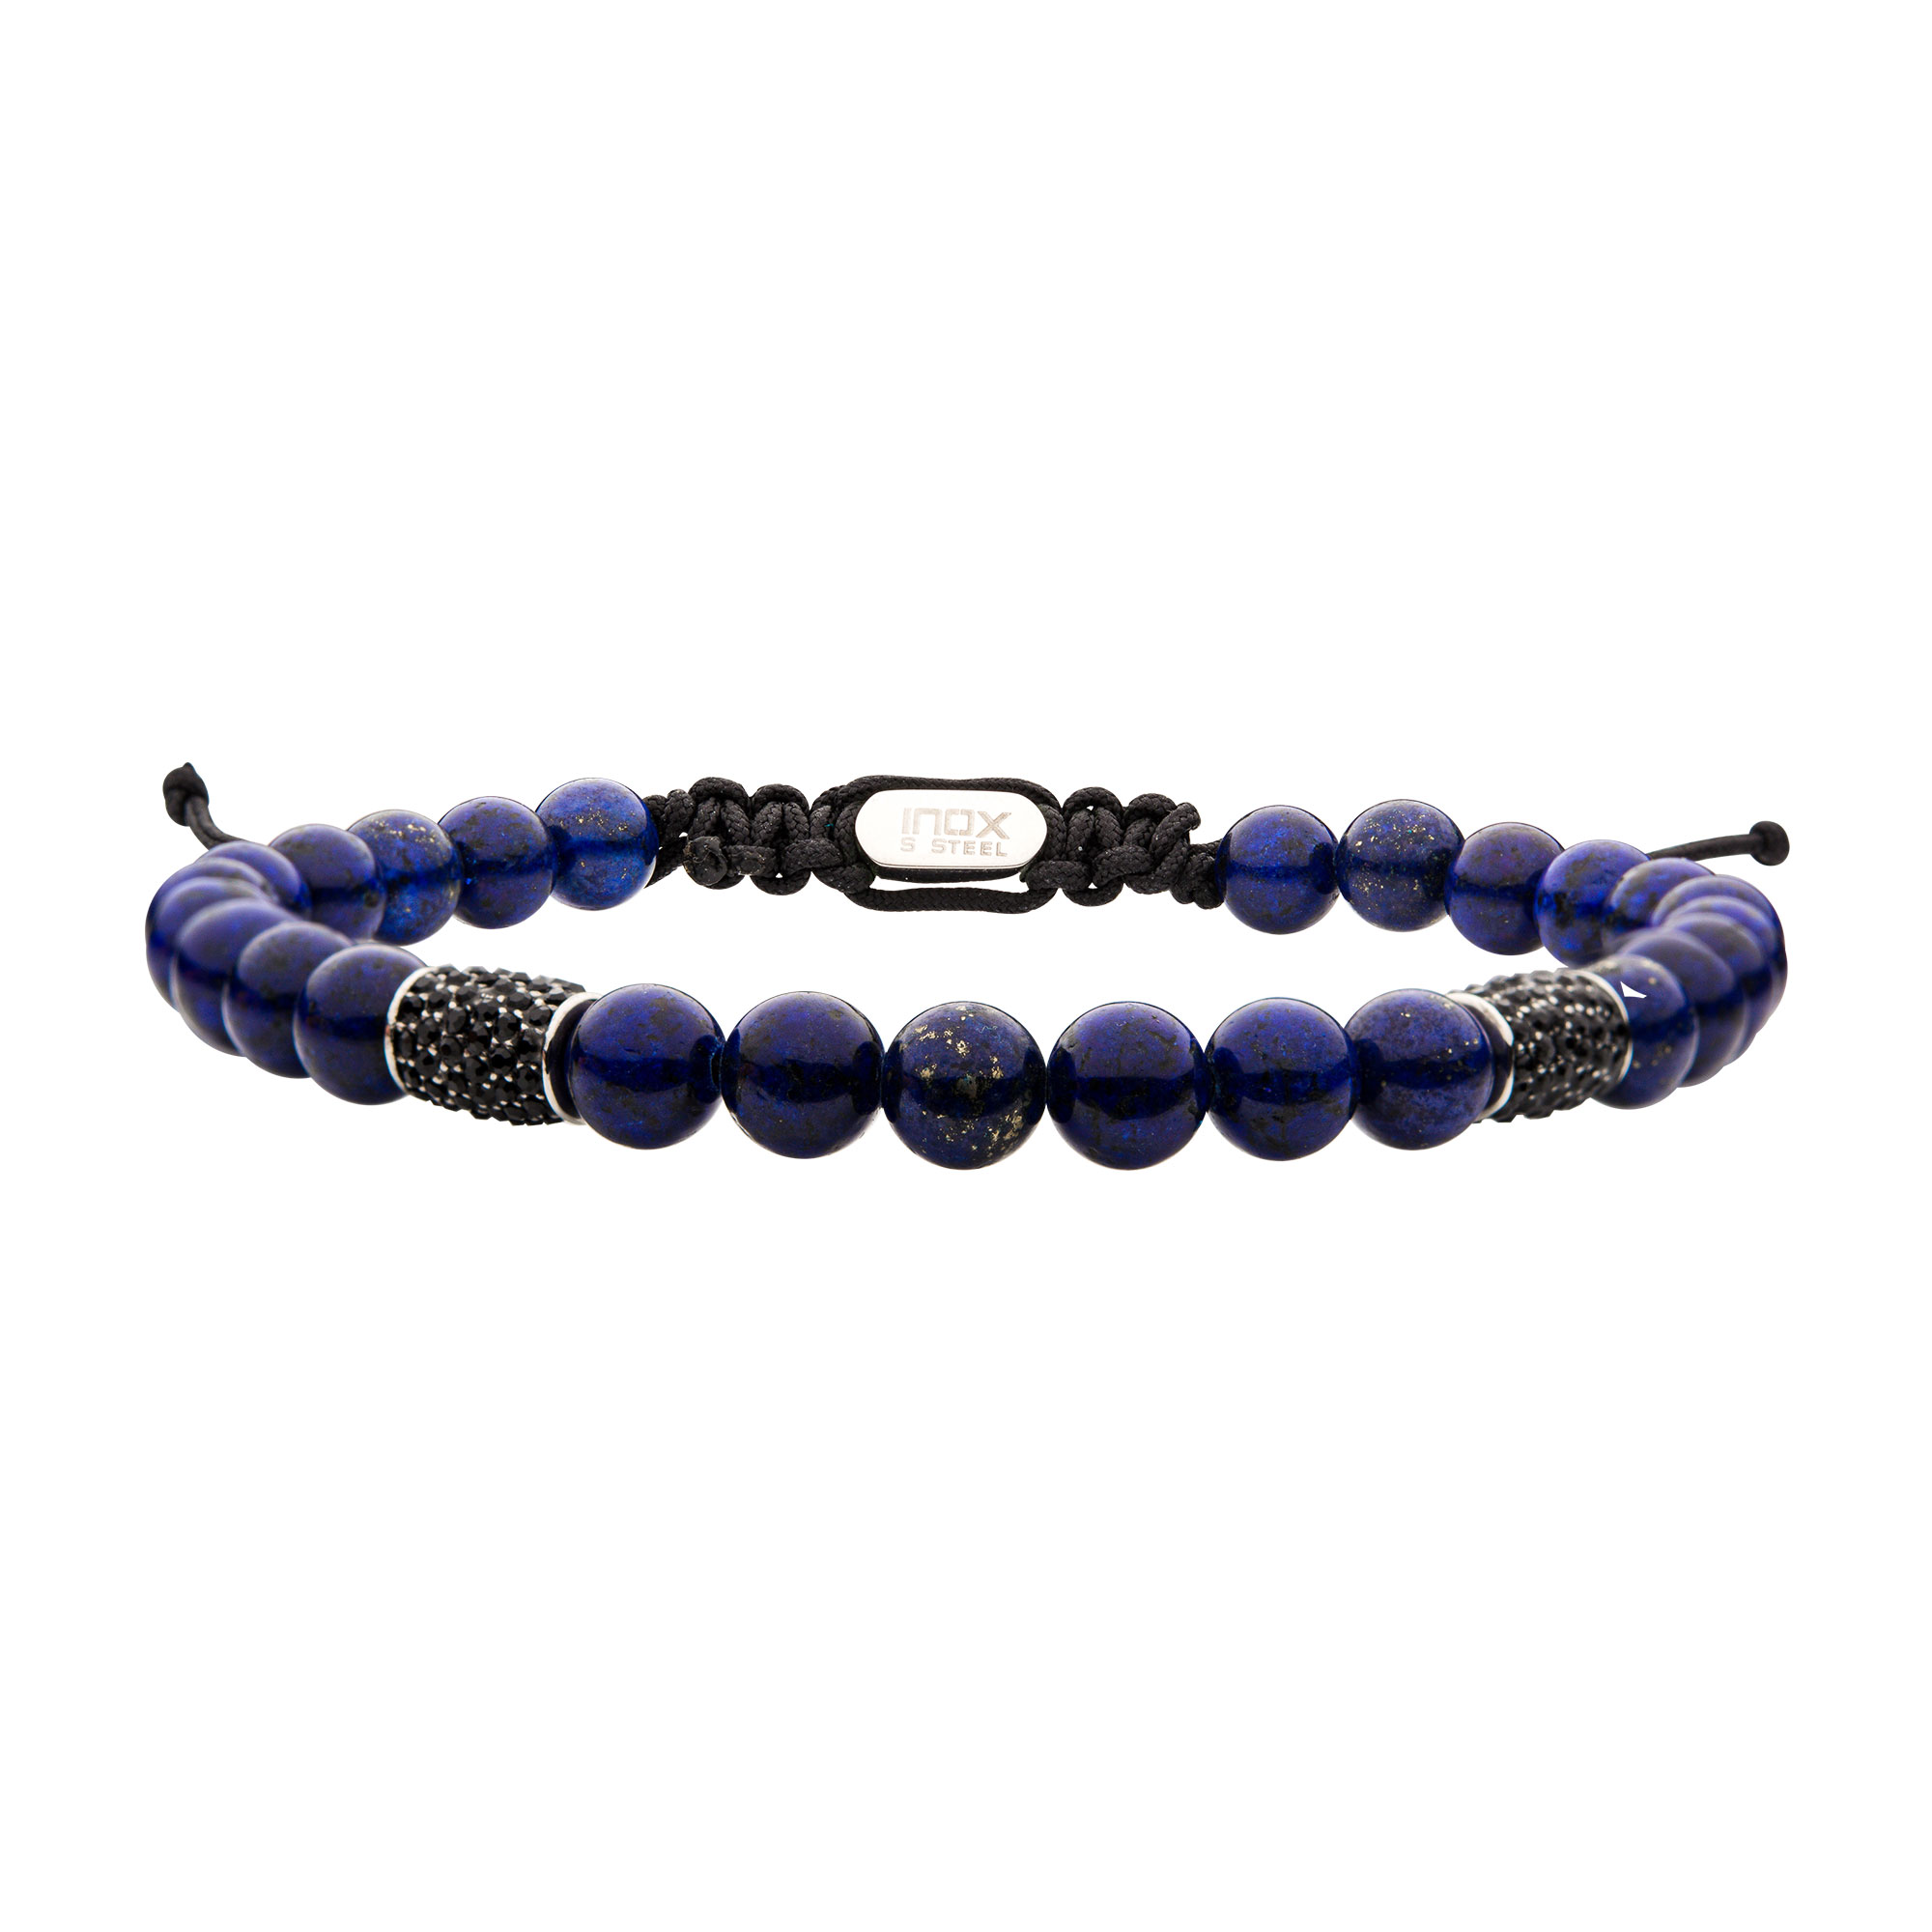 Stainless Steel Beads with Black CZ & Lapis Stone Bead Adjustable Non-Braided Bracelet Lewis Jewelers, Inc. Ansonia, CT